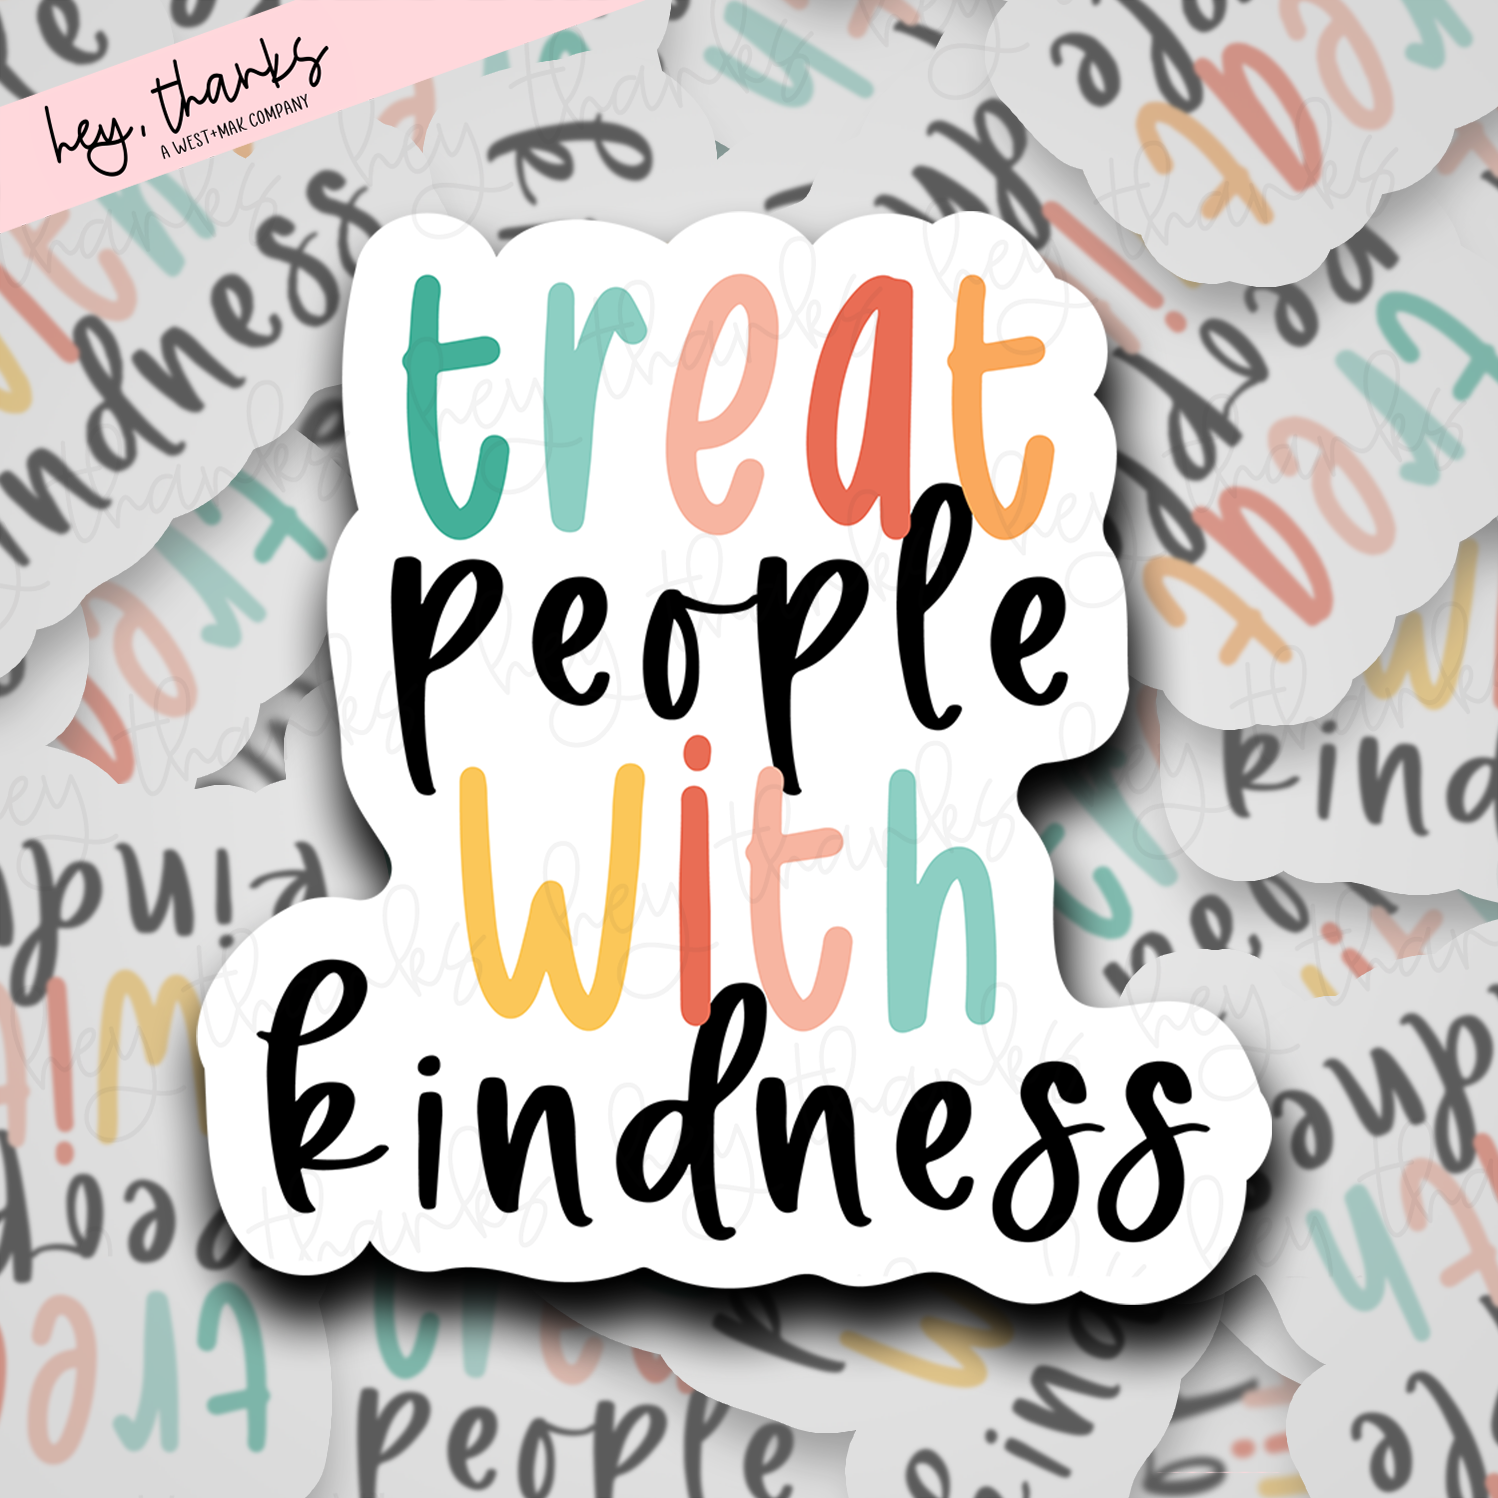 Treat People with Kindness | Packaging Stickers